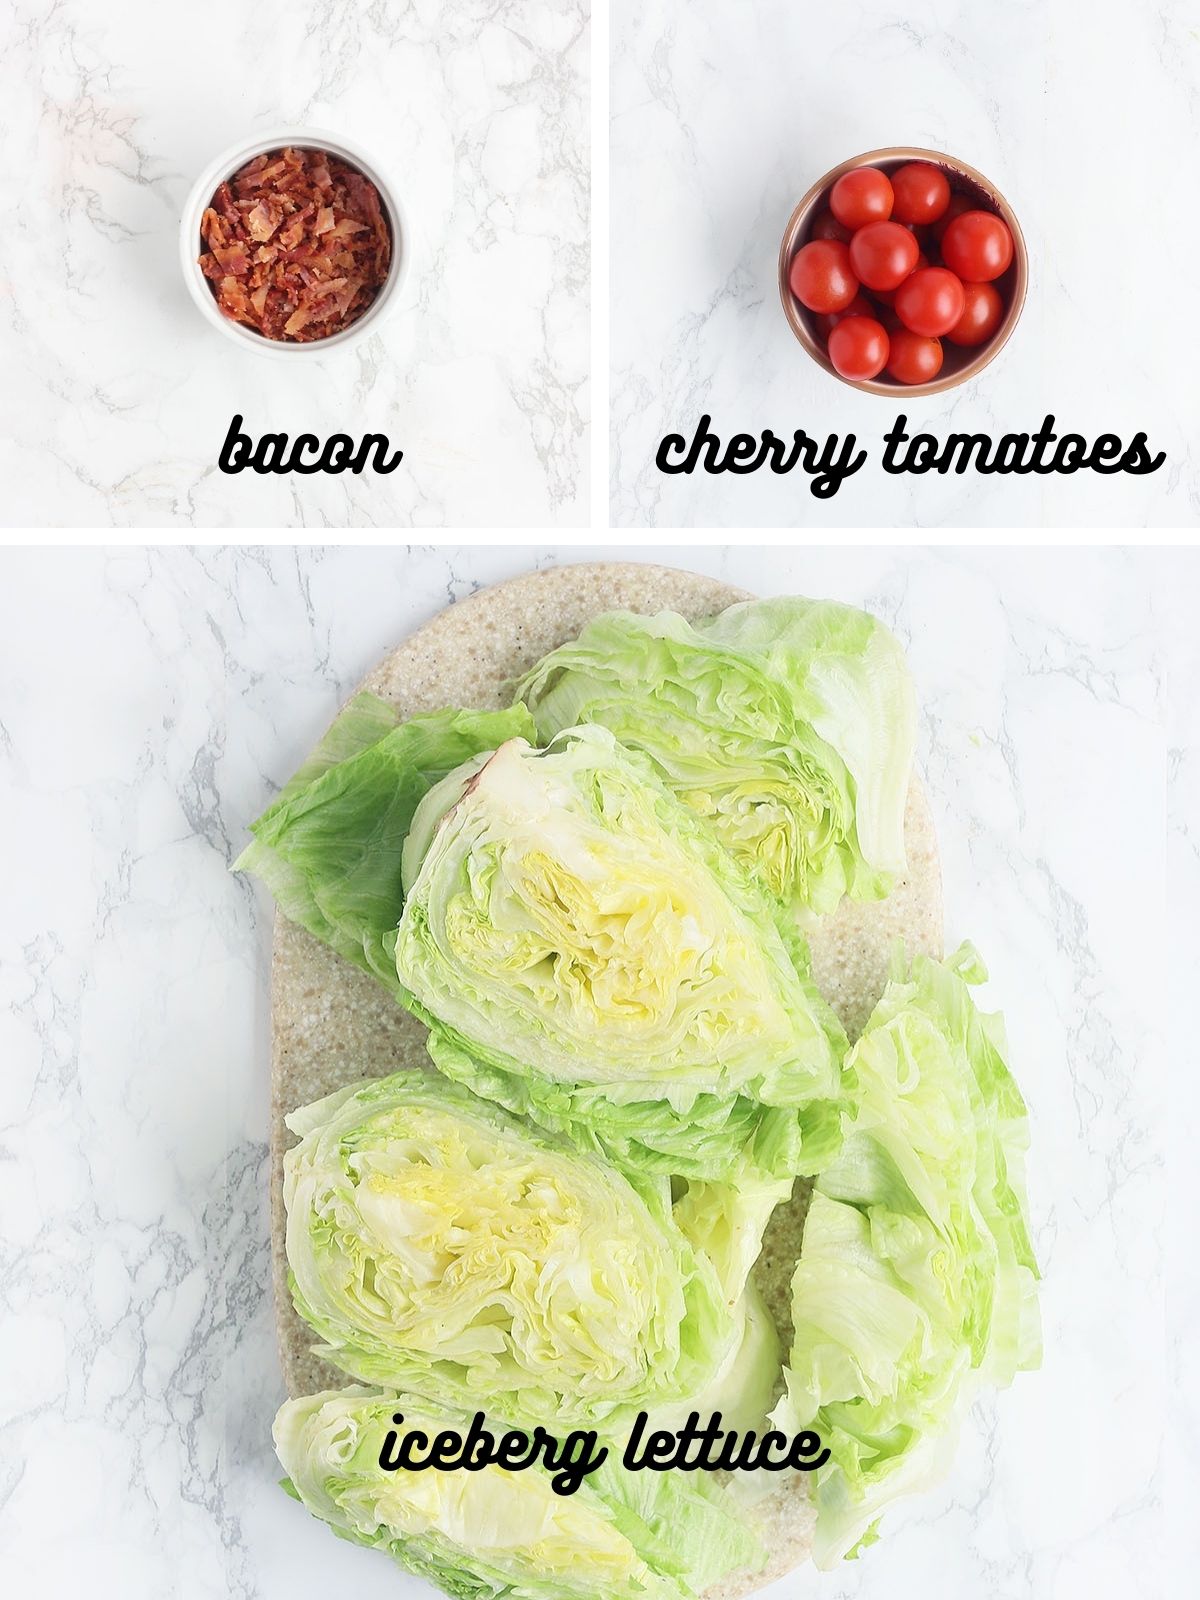 wedge salad ingredients include chopped cooked bacon, cherry tomatoes and iceberg lettuce